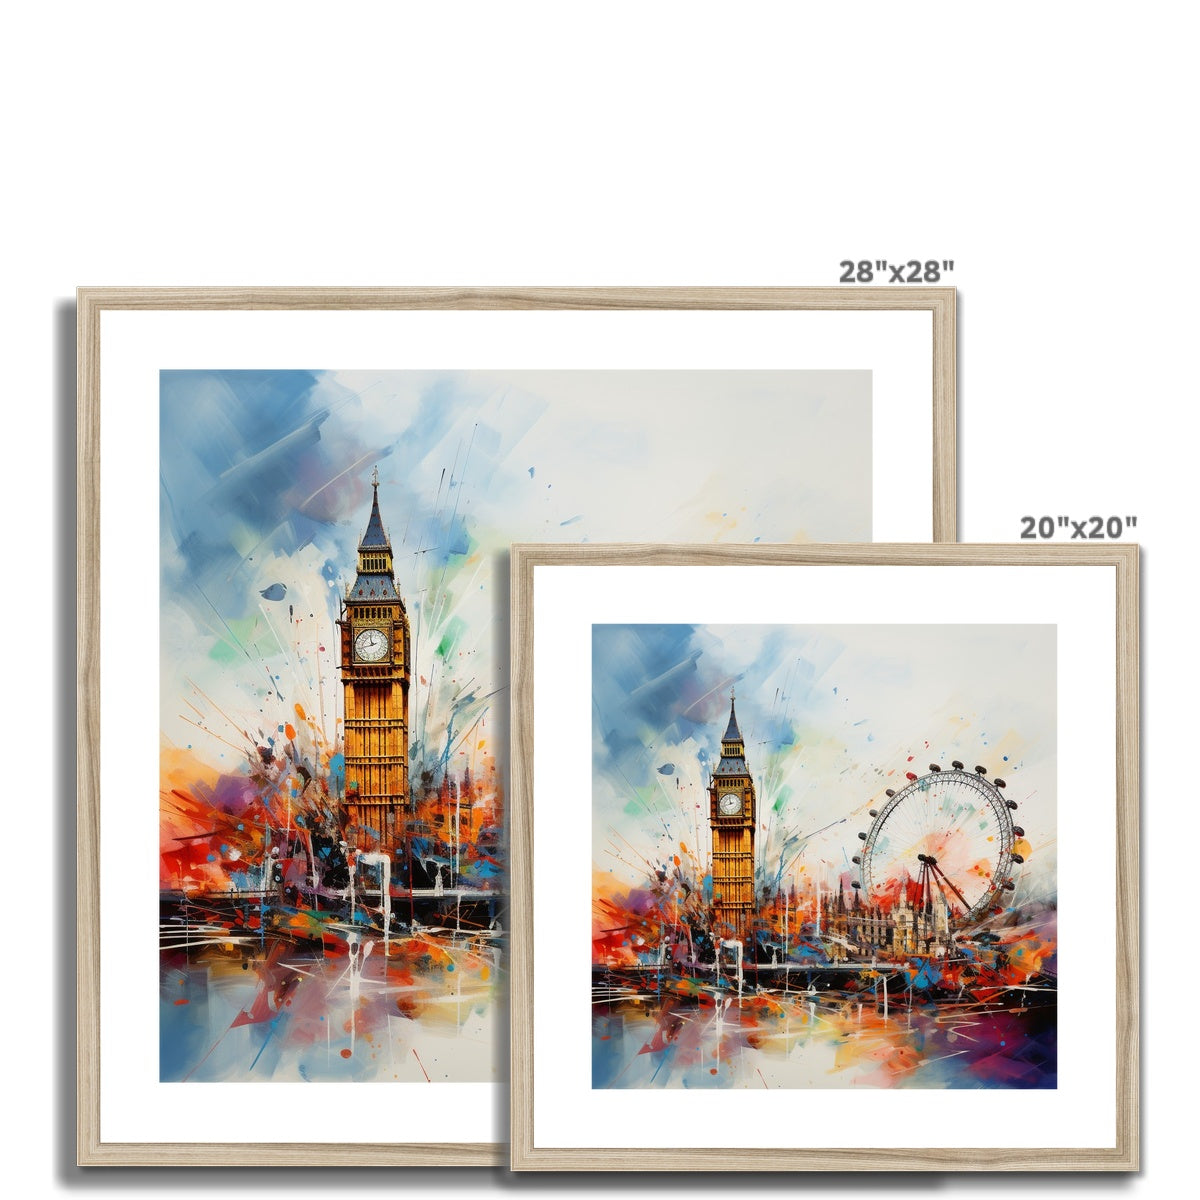 London Town Framed & Mounted Print